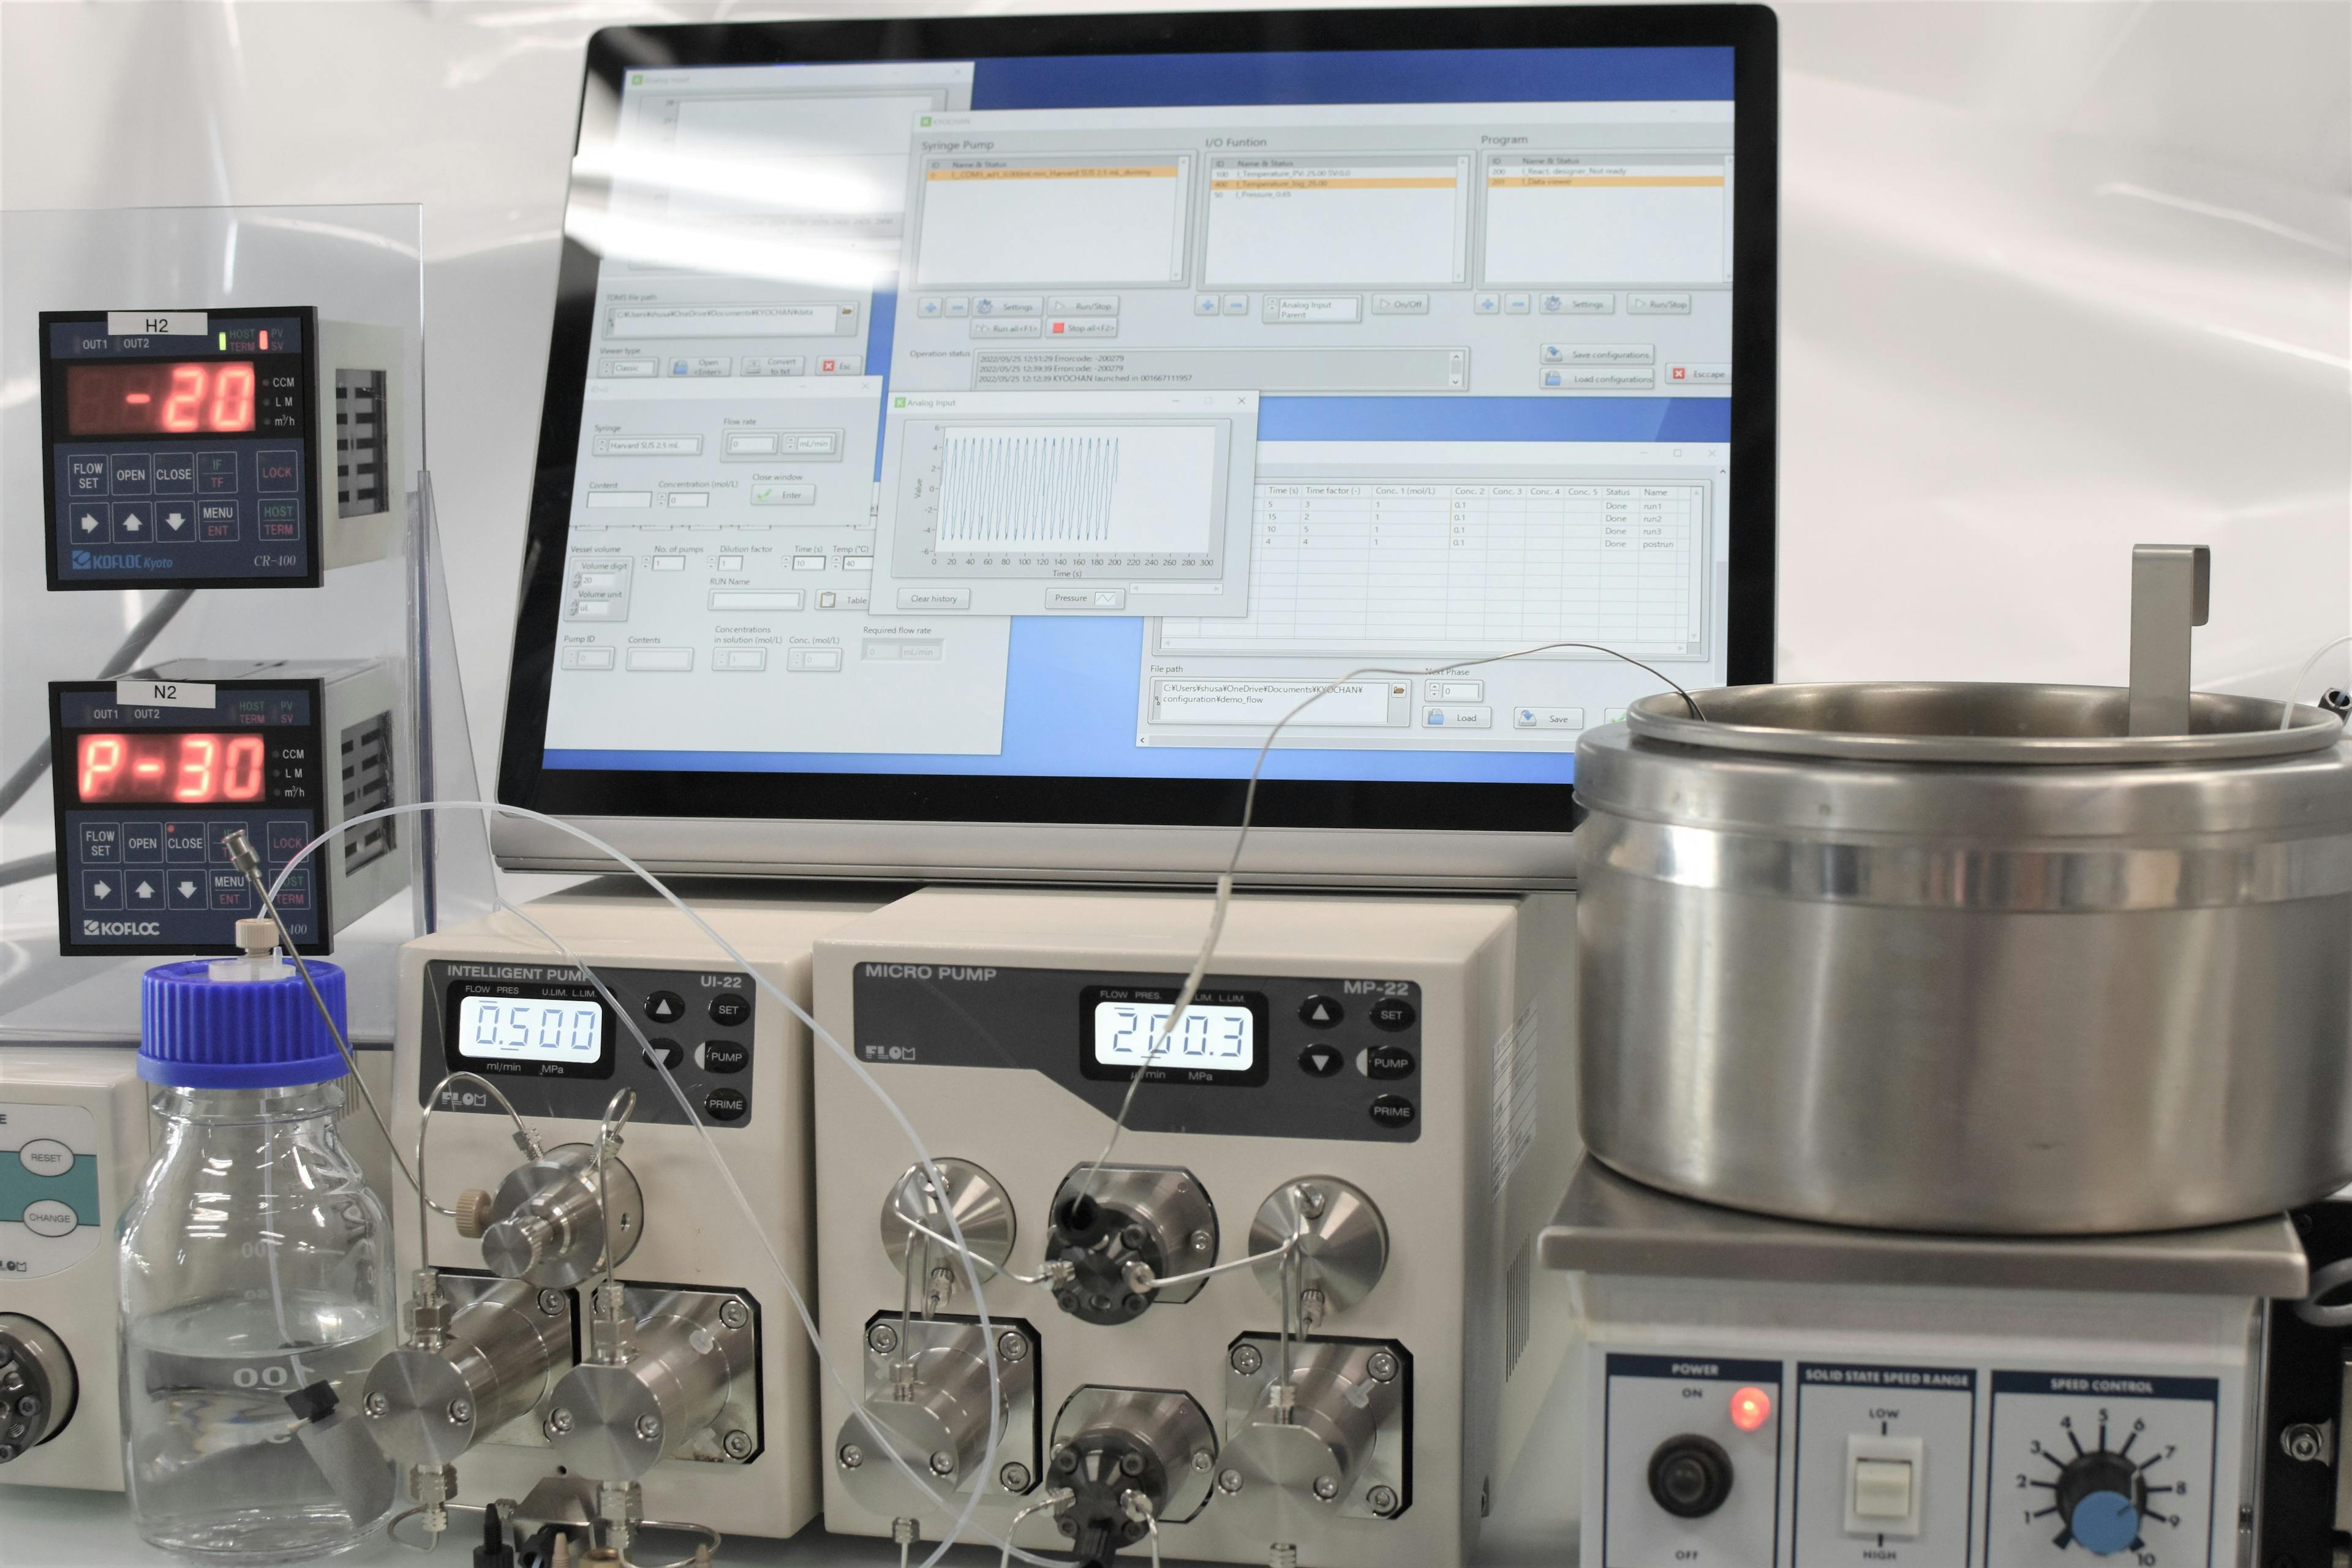 The substances that make hydrogenation reactions more efficient are searched for at once in an automated flow reactor.